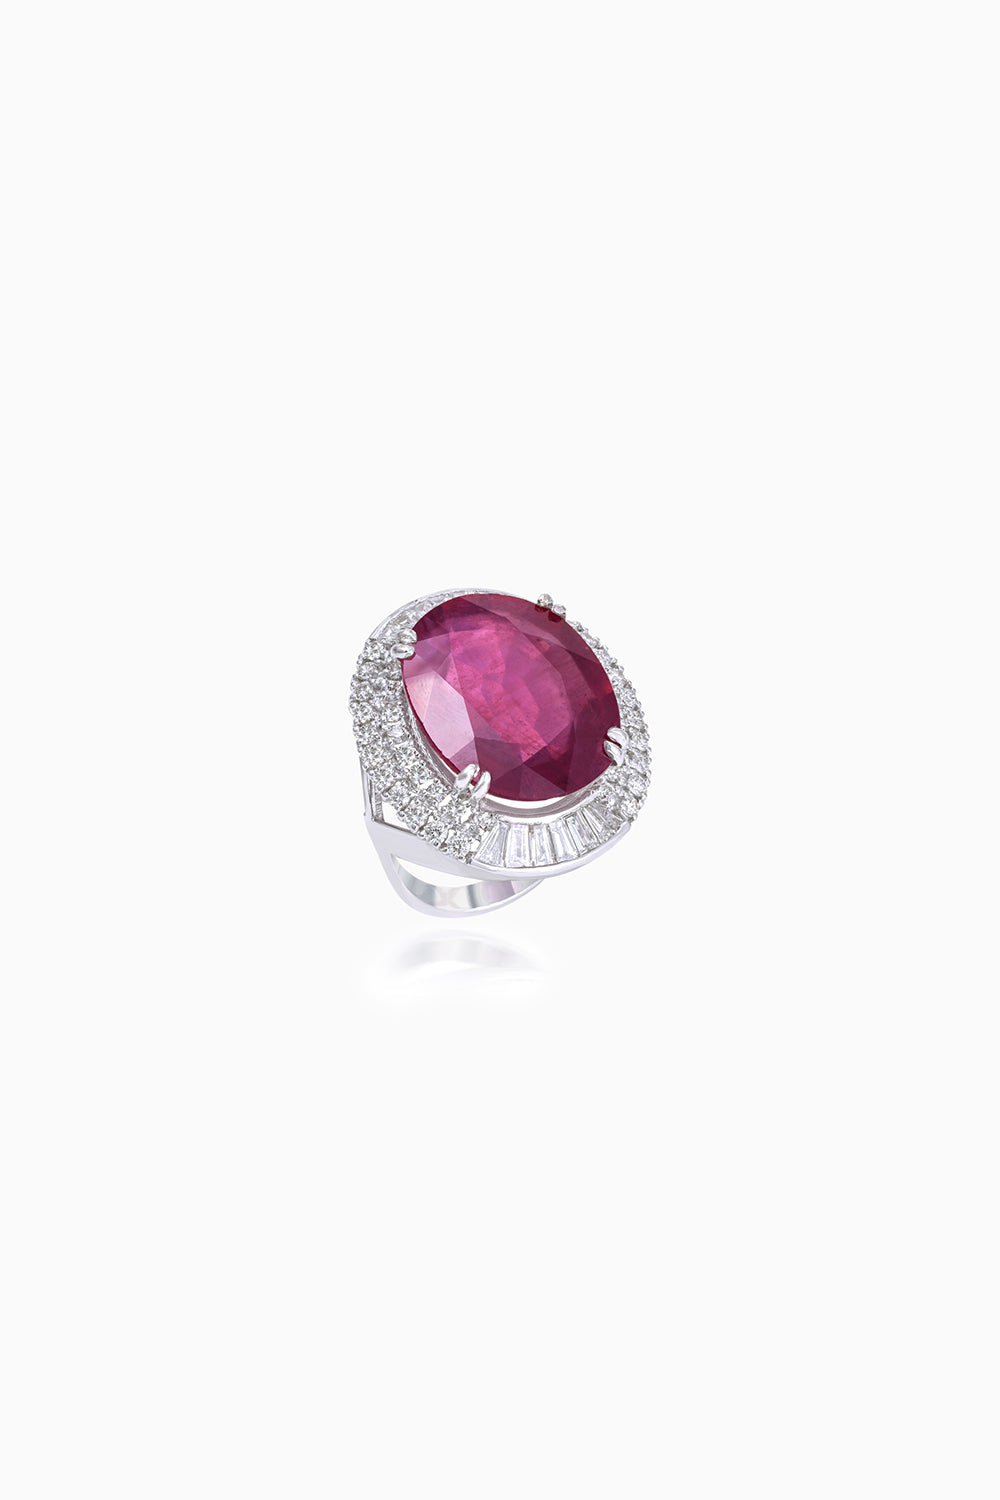 Ruby and Diamond Cocktail Ring in 18KT White Gold